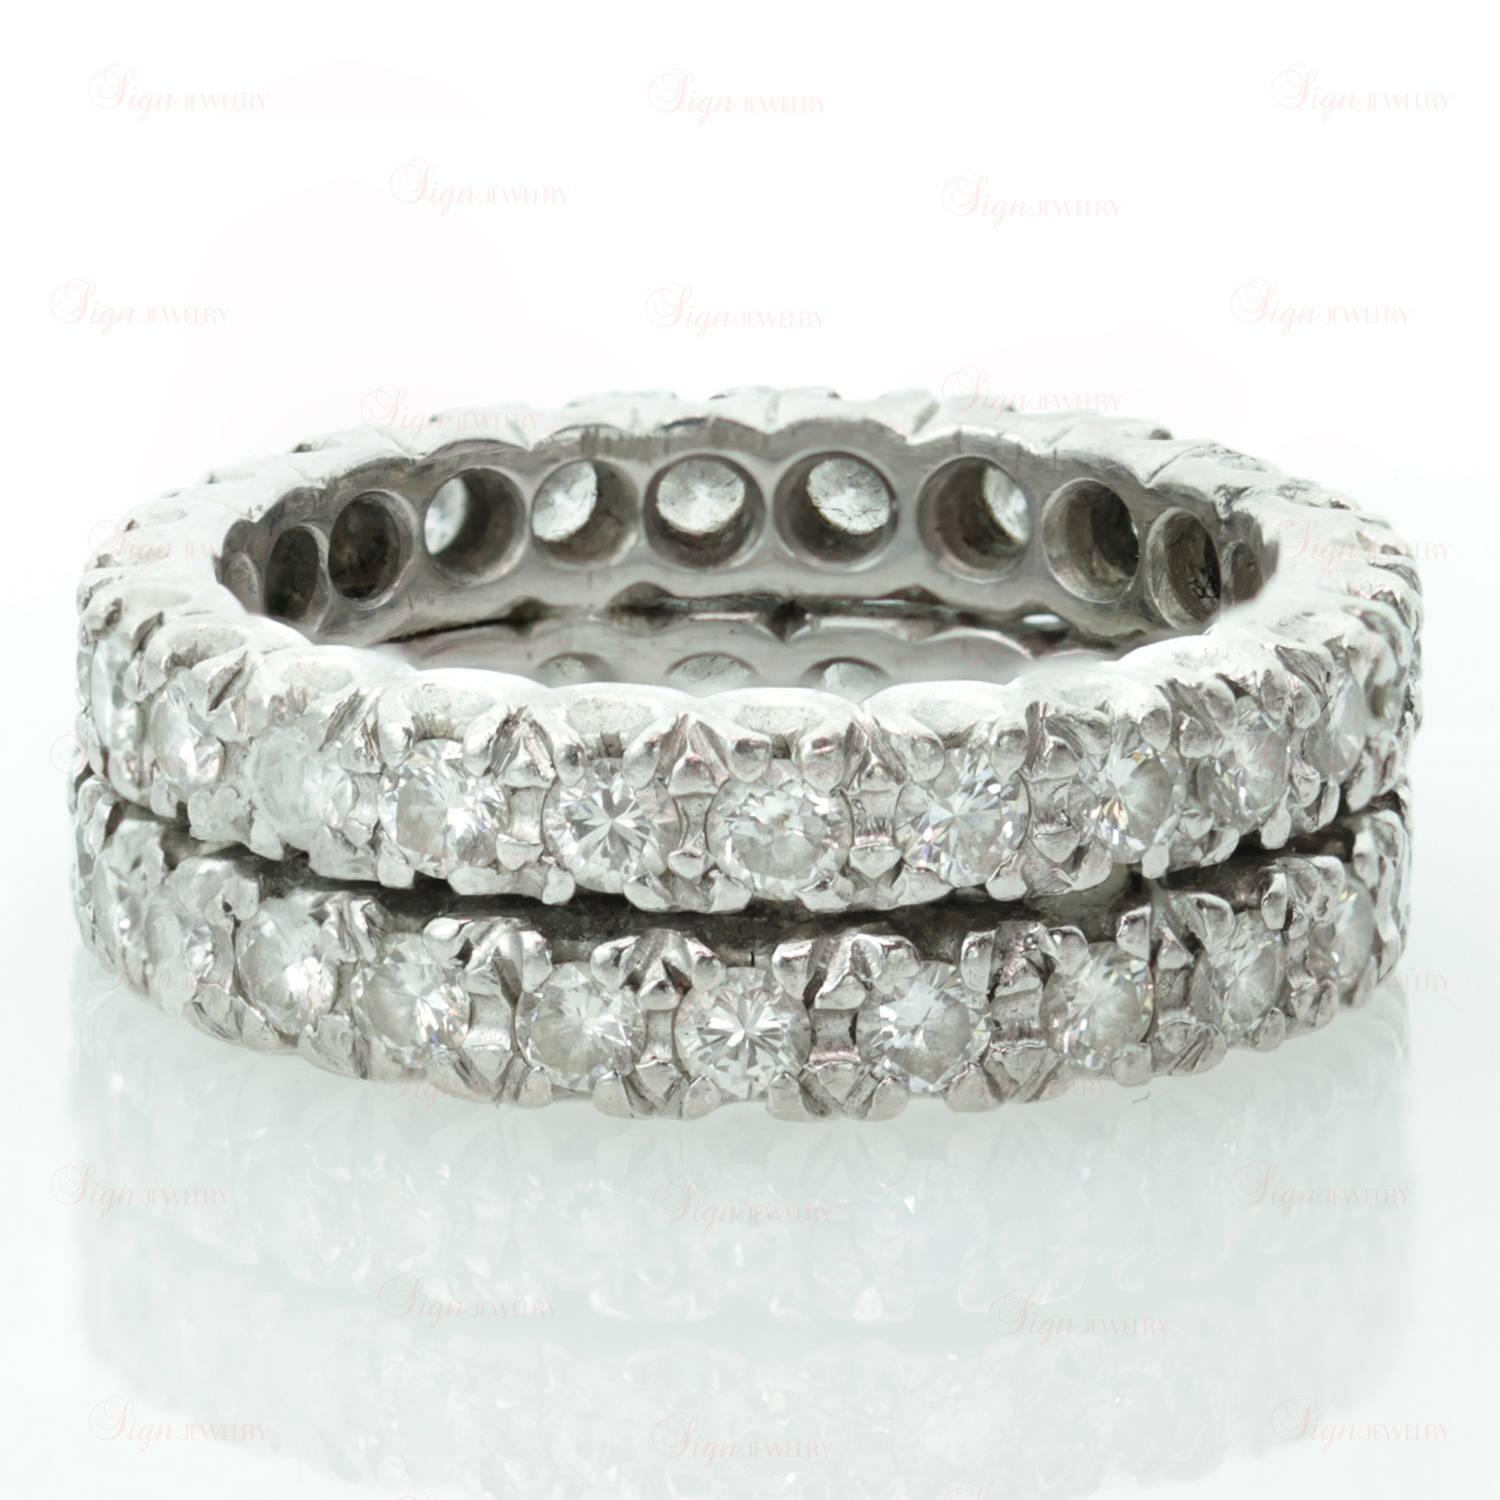 This elegant two-row eternity band is made in fine platinum and pave-set with an estimated 2.75 carats of sparkling round diamonds. A timeless romantic design. Measurements: 0.27